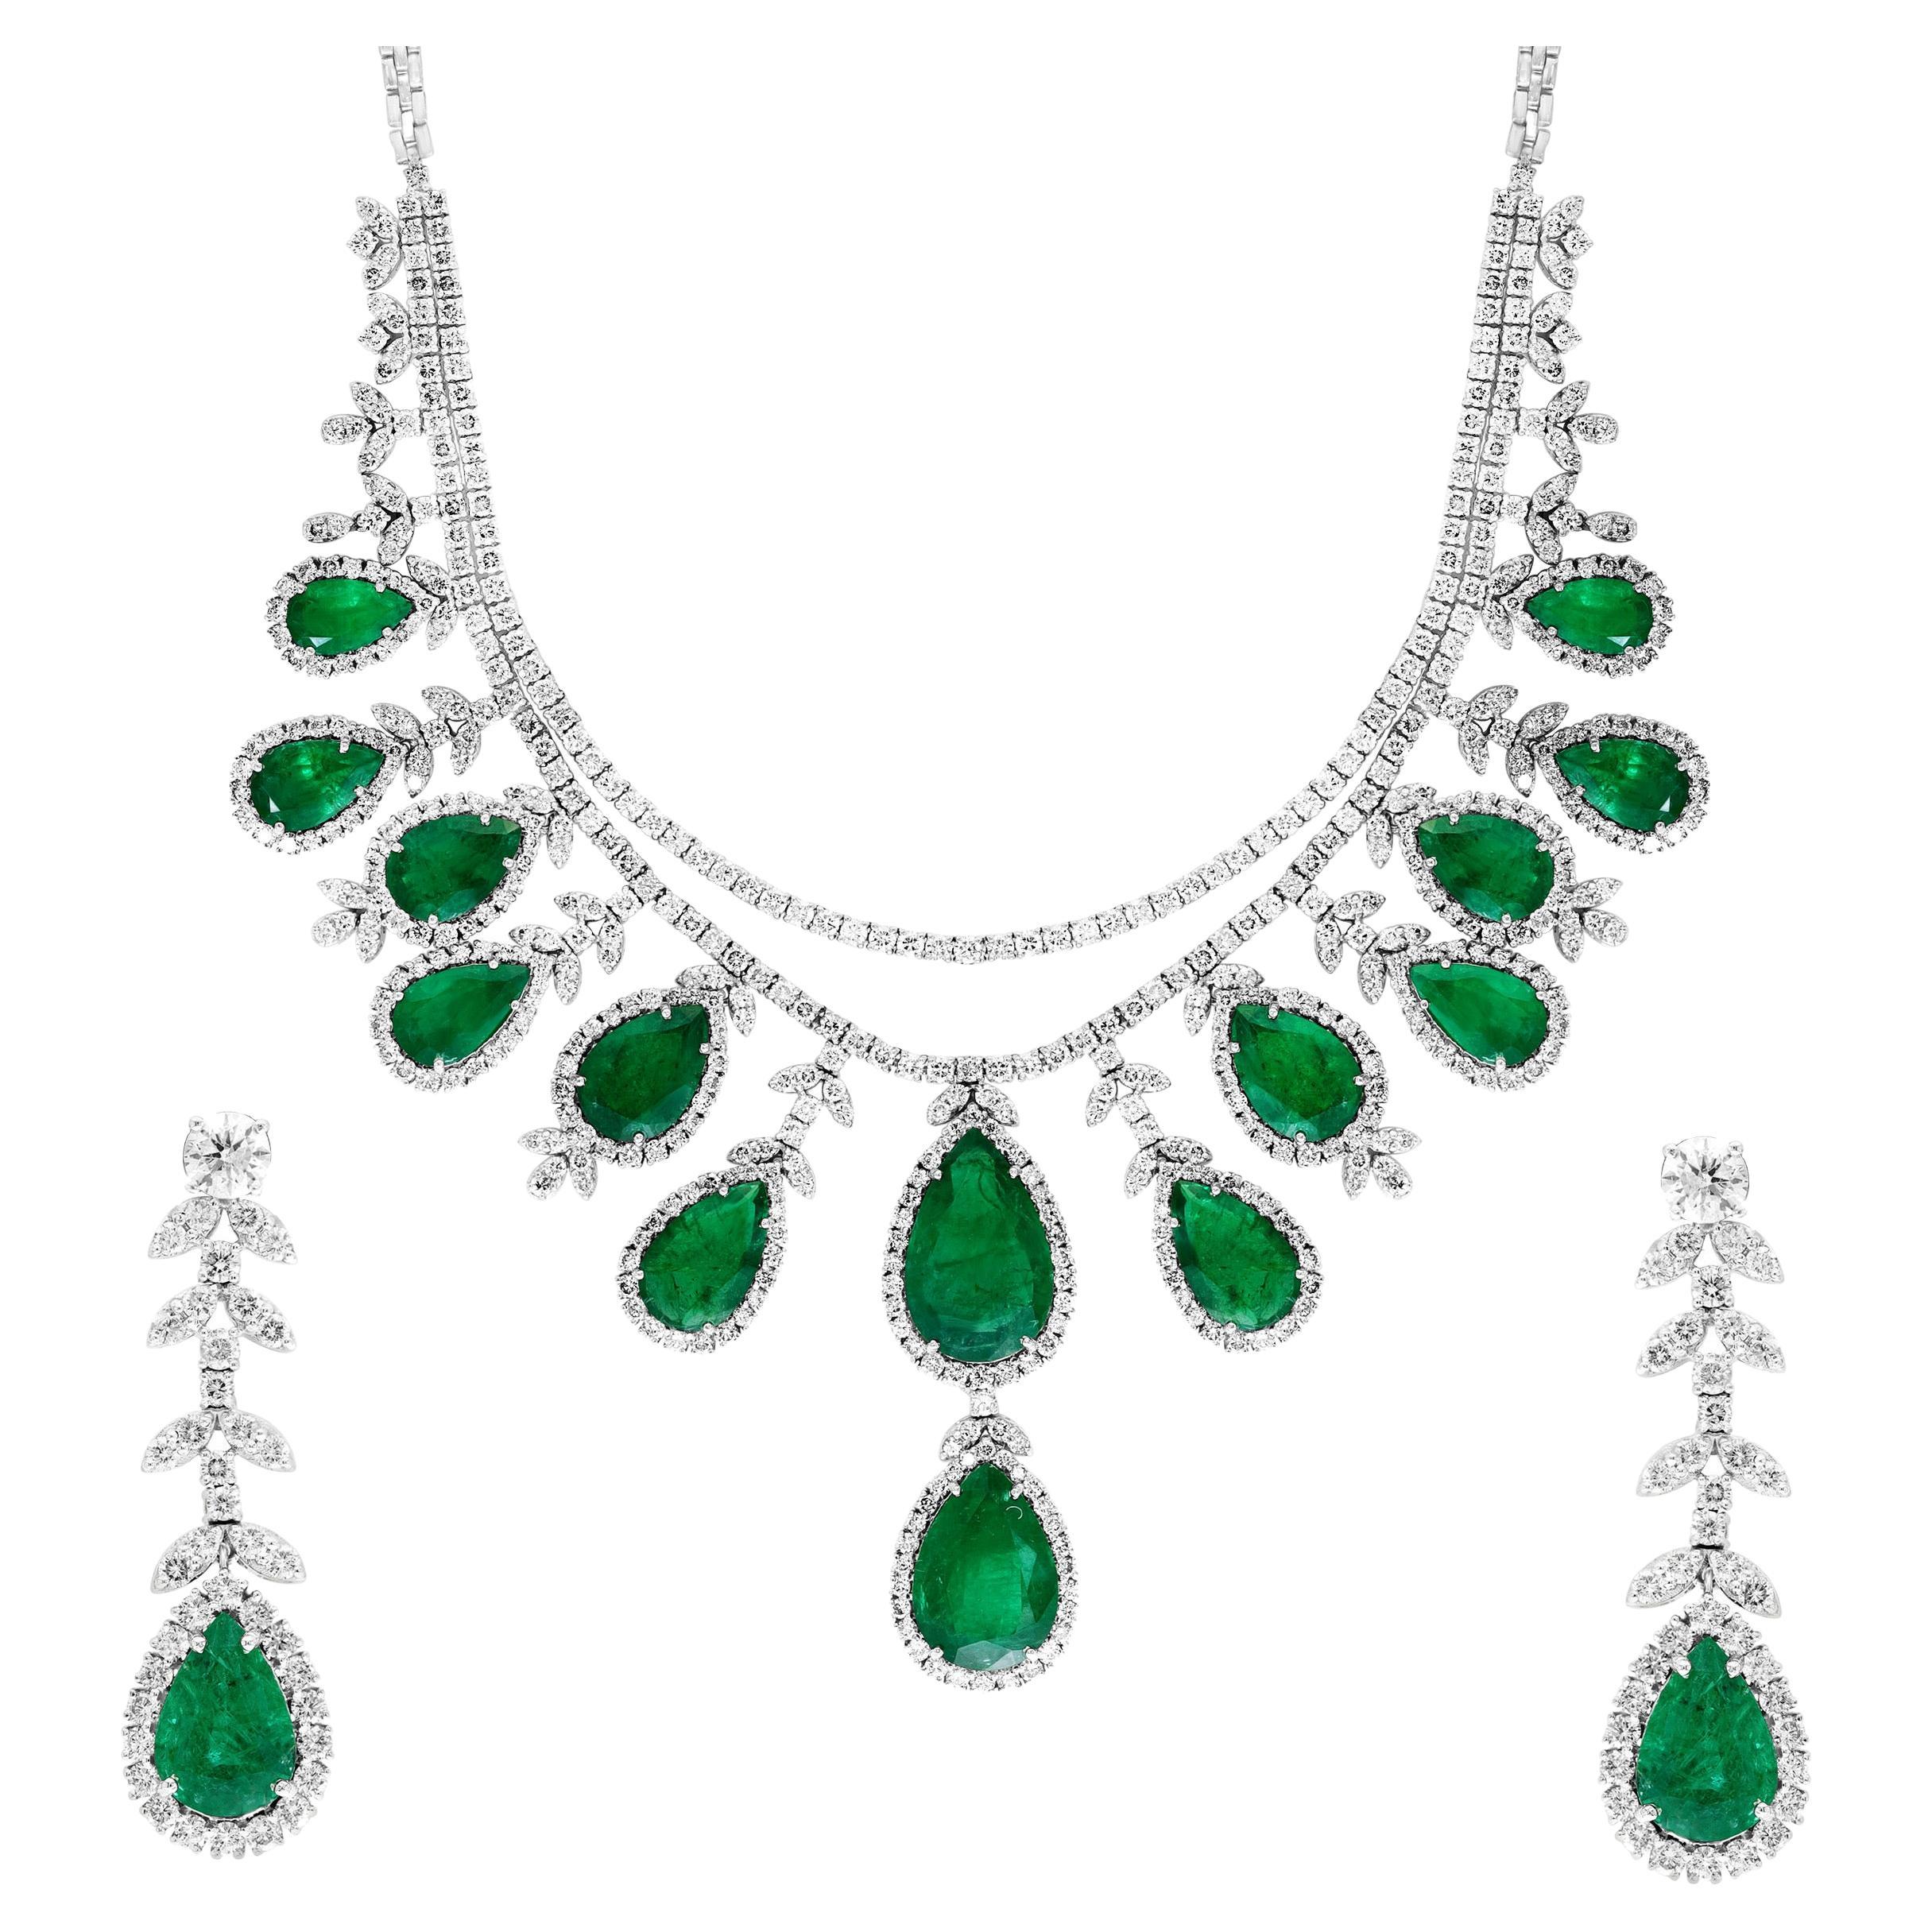 75 Ct Zambian Emerald and 30 Ct Diamond Necklace and Earring Bridal Suite